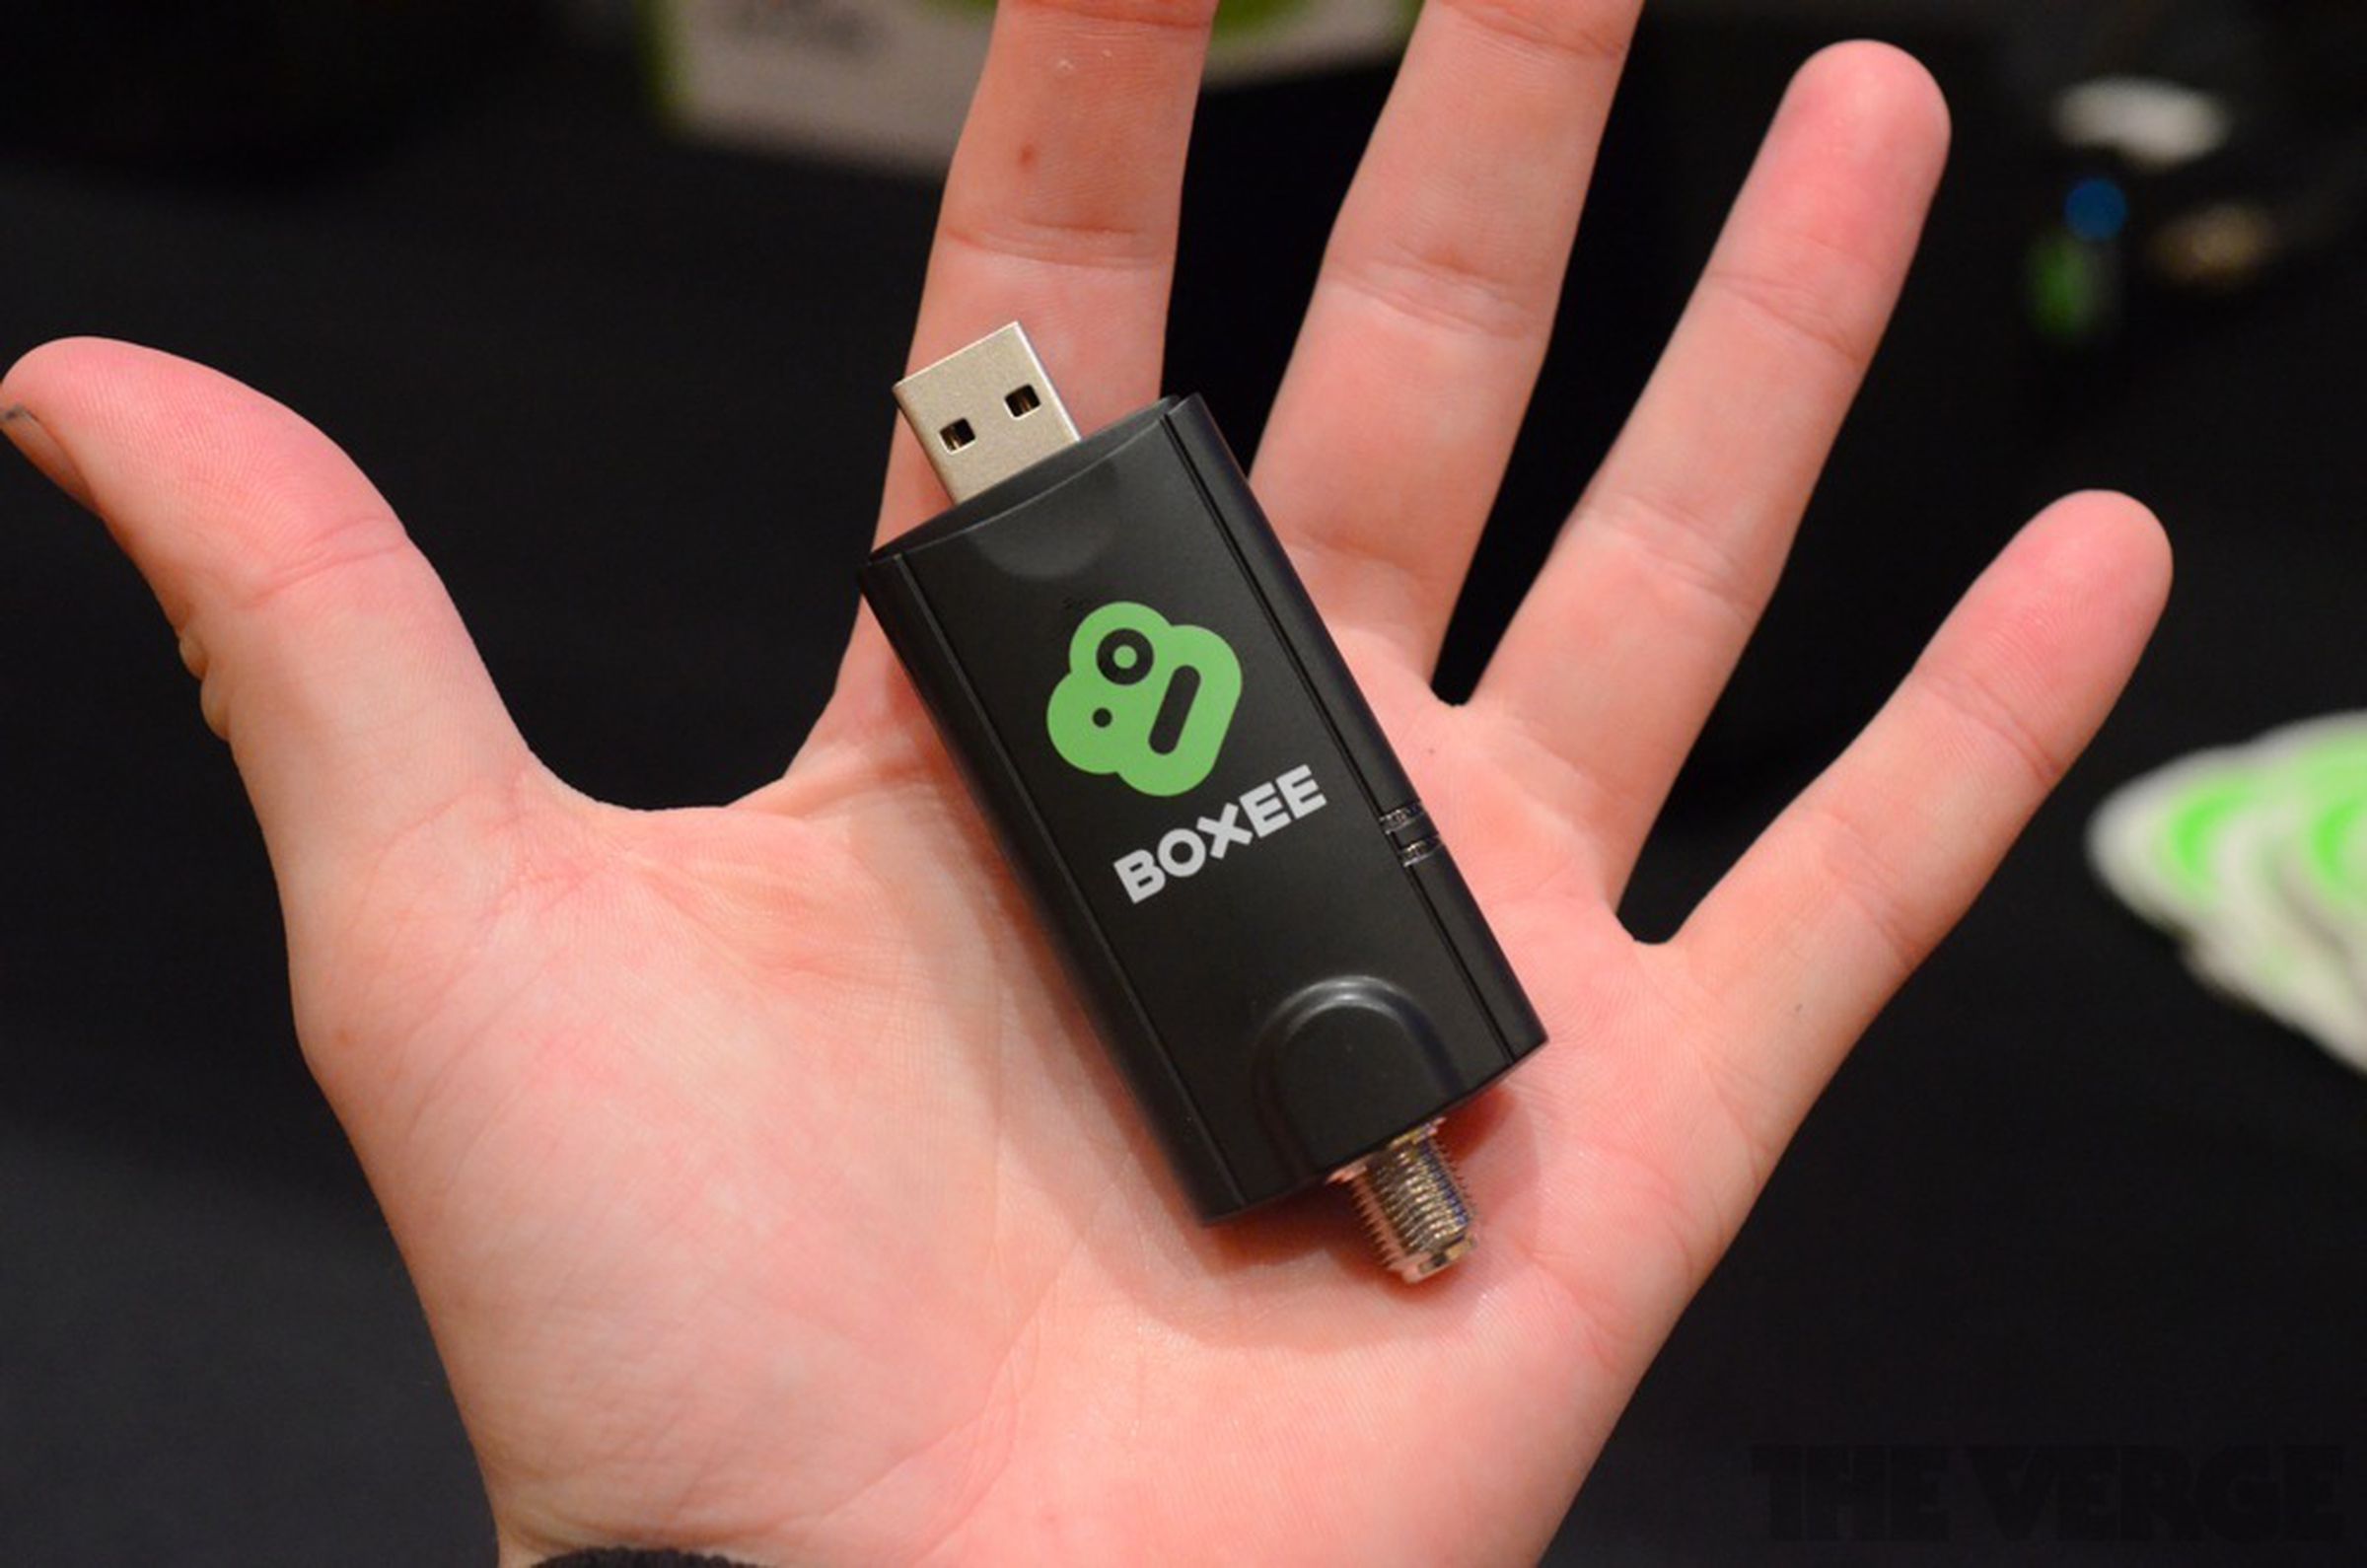 Boxee Live TV hands-on pictures